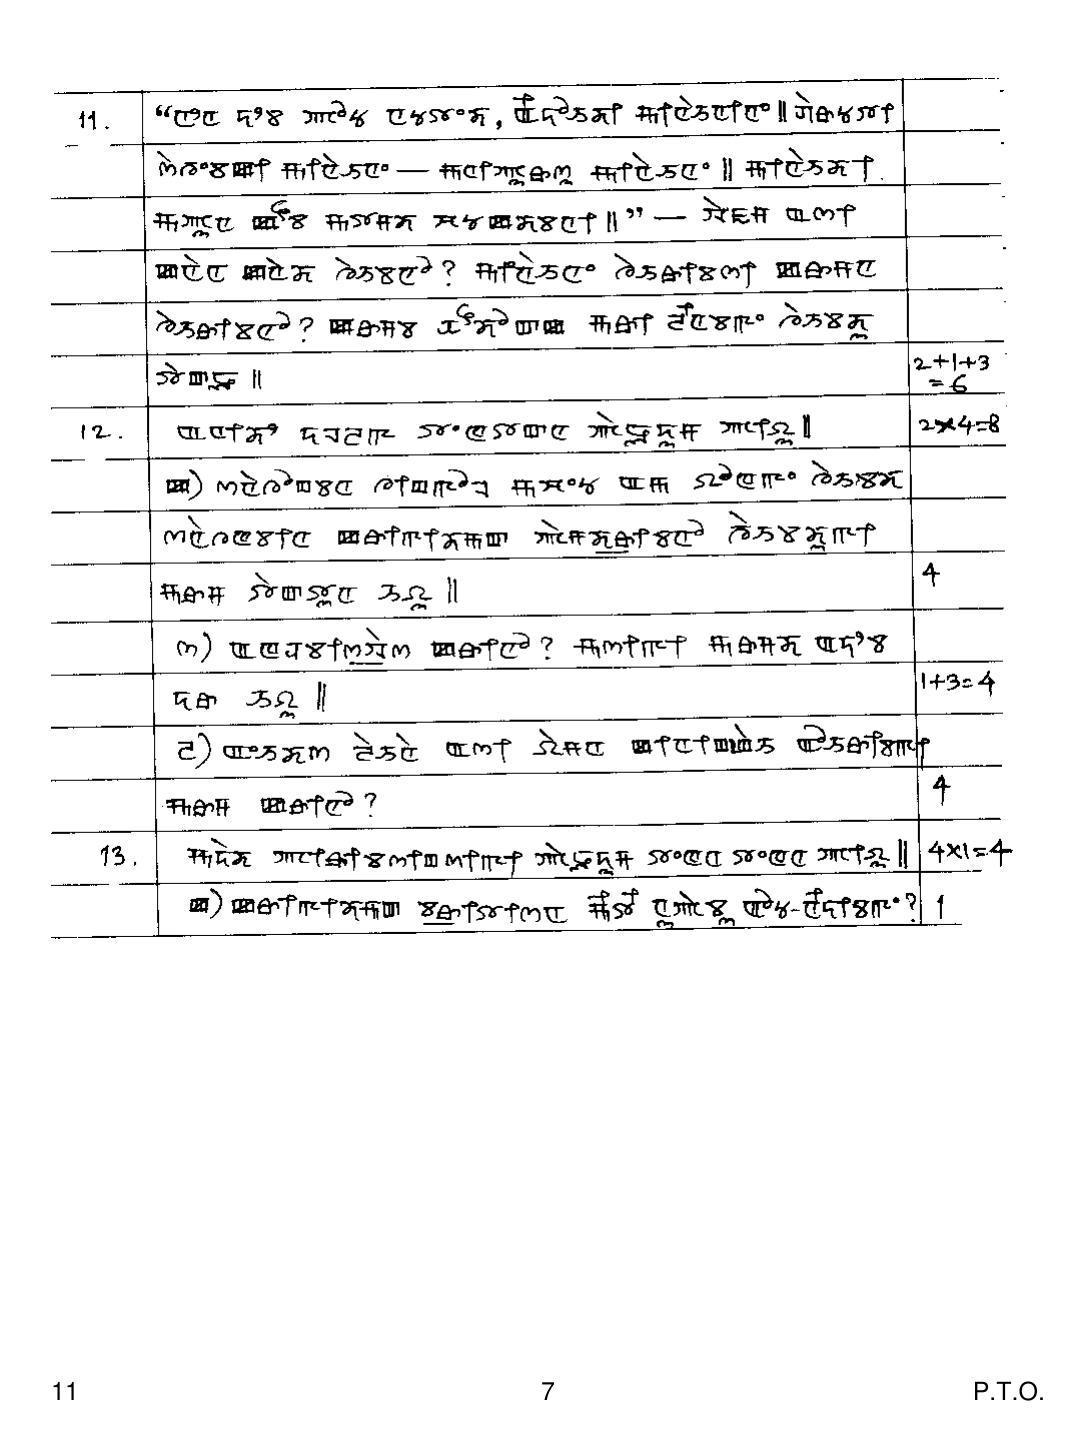 CBSE Class 12 11 Manipuri_compressed 2019 Question Paper - Page 7